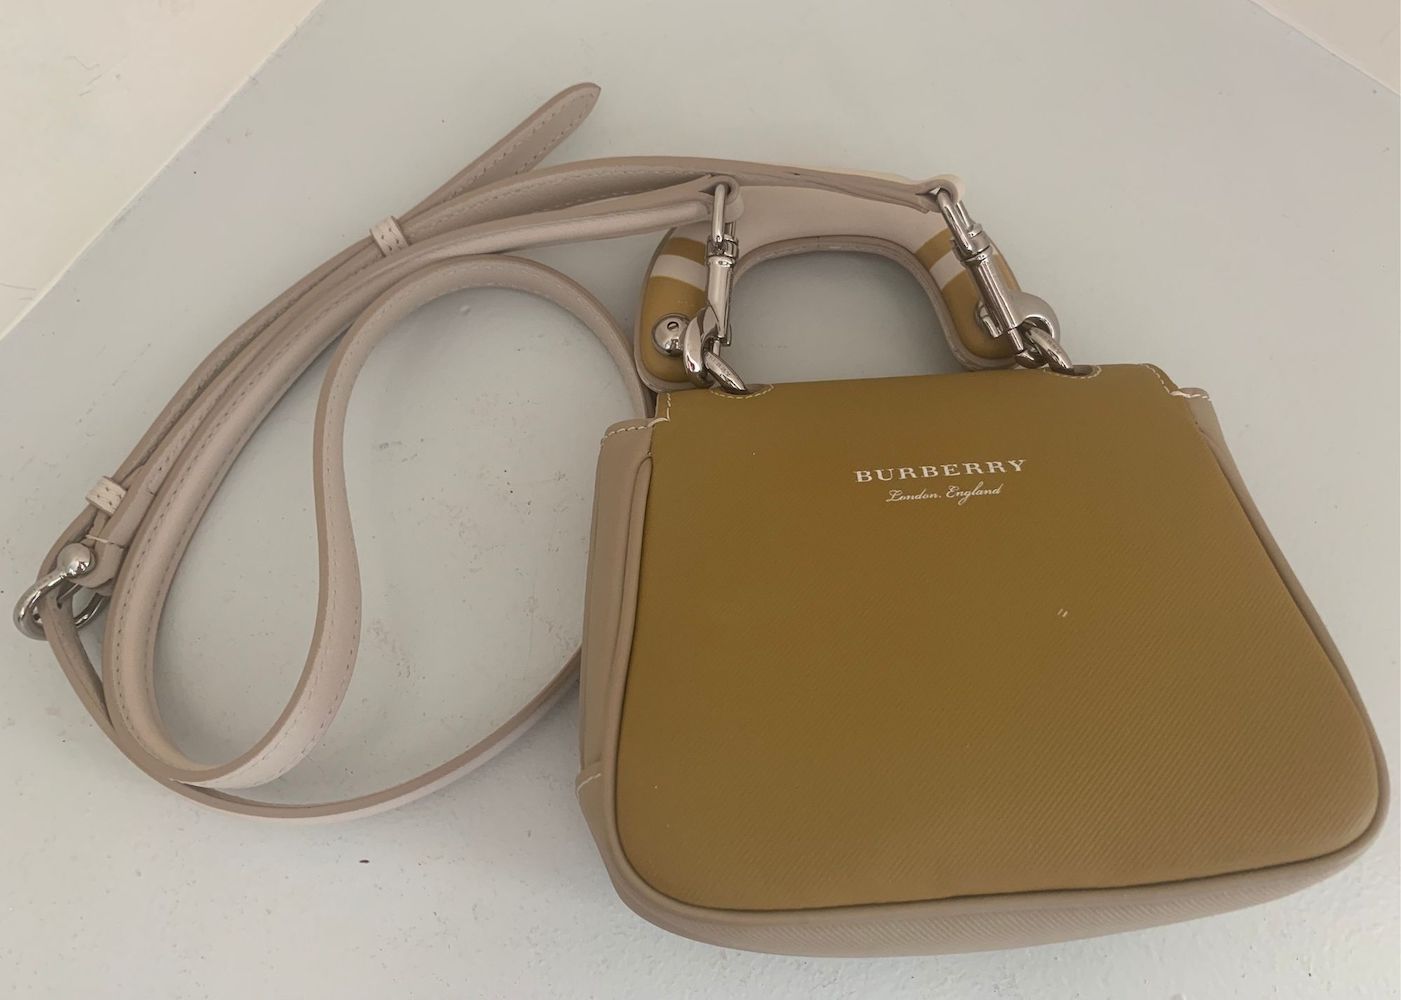 Burberry Dk88 Mini in Trench Leather - J'adore Fashion Boutique